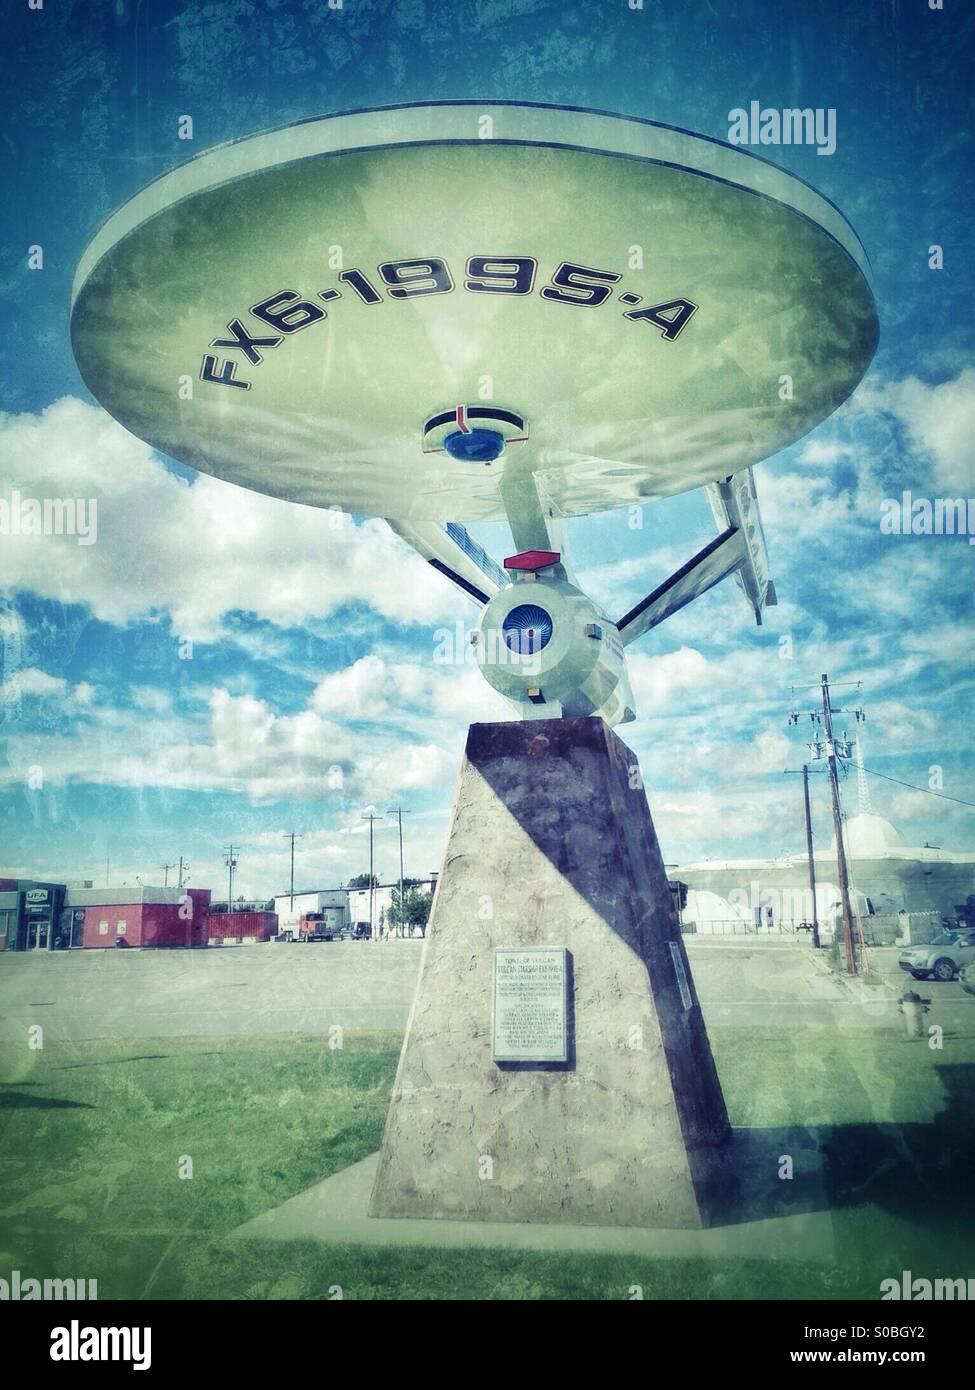 Model of the Starship Enterprise, in the town of Vulcan, Alberta, Canada. Stock Photo